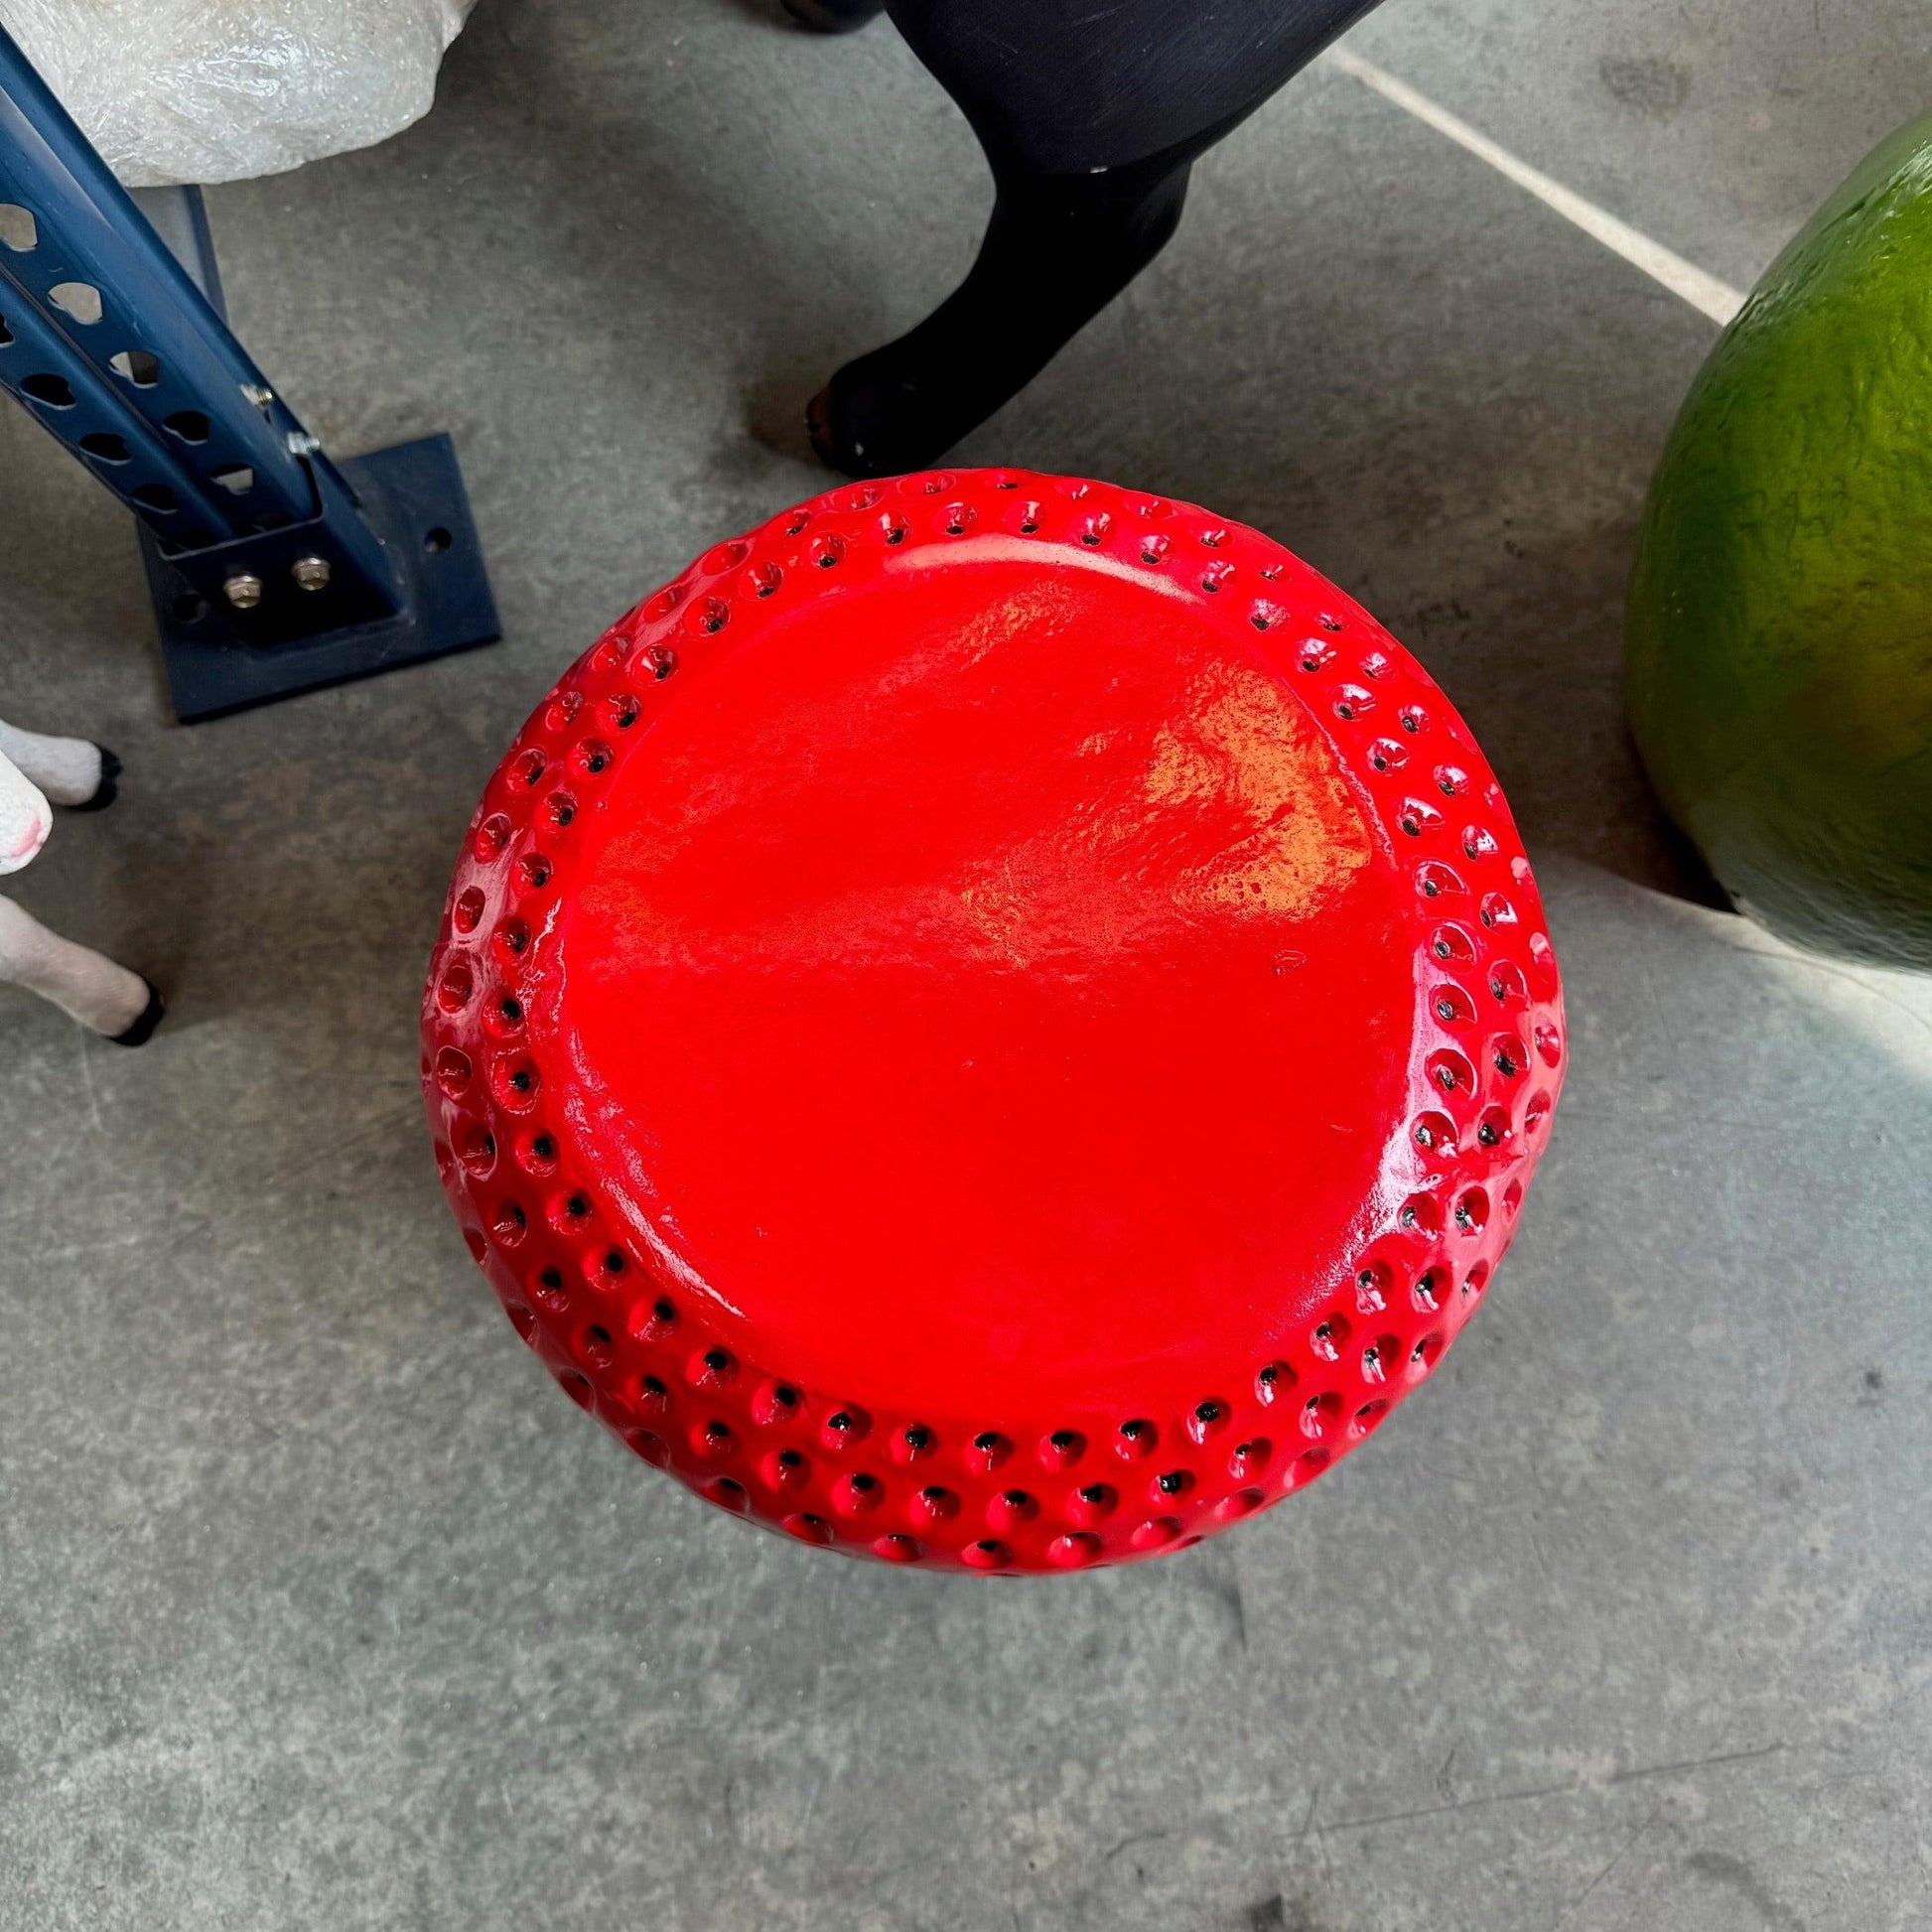 Strawberry Table Stool Statue - LM Treasures Prop Rentals 